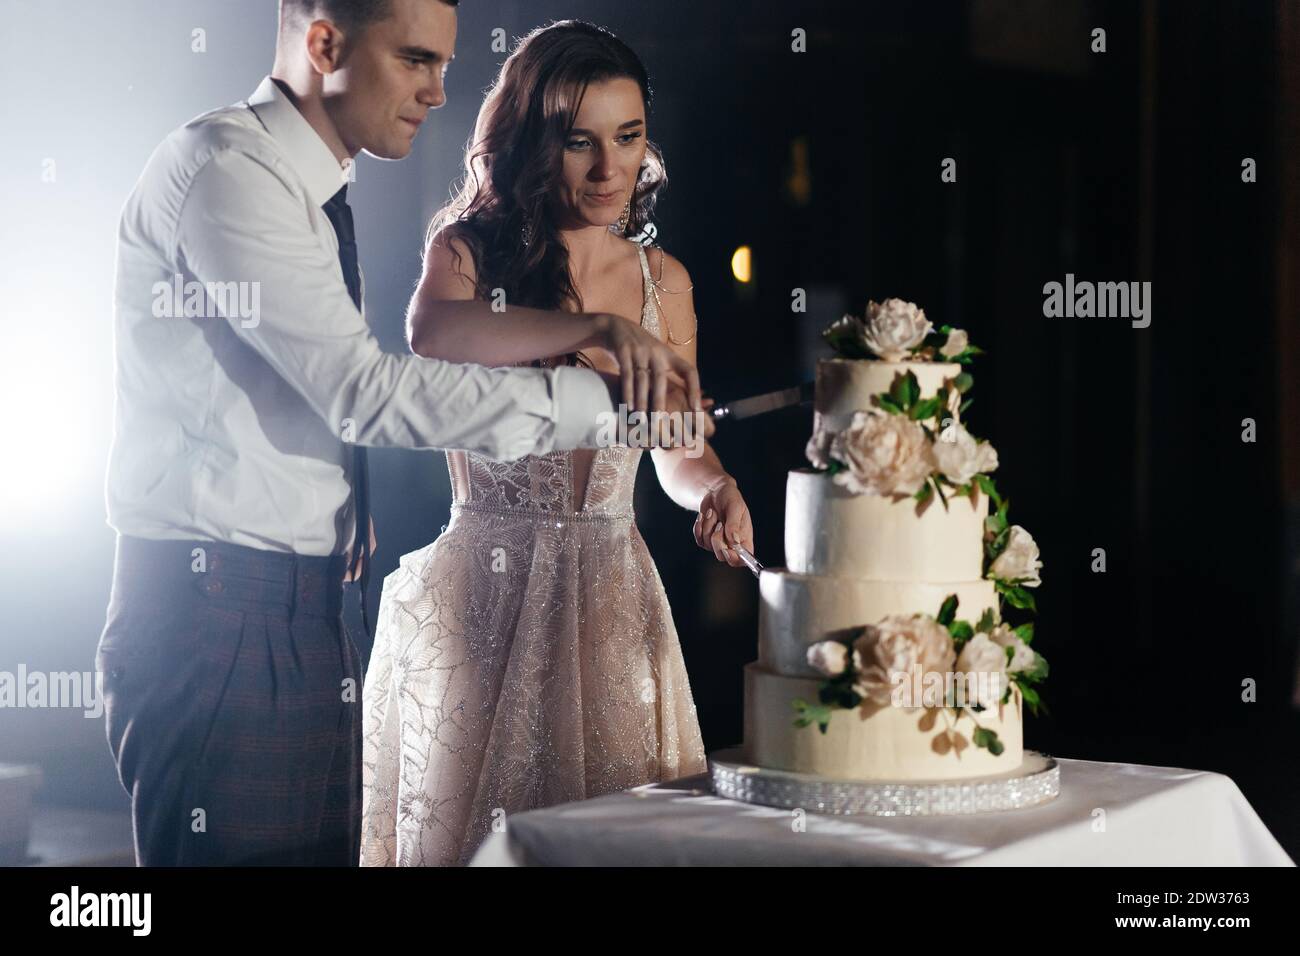 Concentrated newlyweds cutting three-tiered wedding cake decorated with flowers. Wedding party. Happy bride and groom Stock Photo